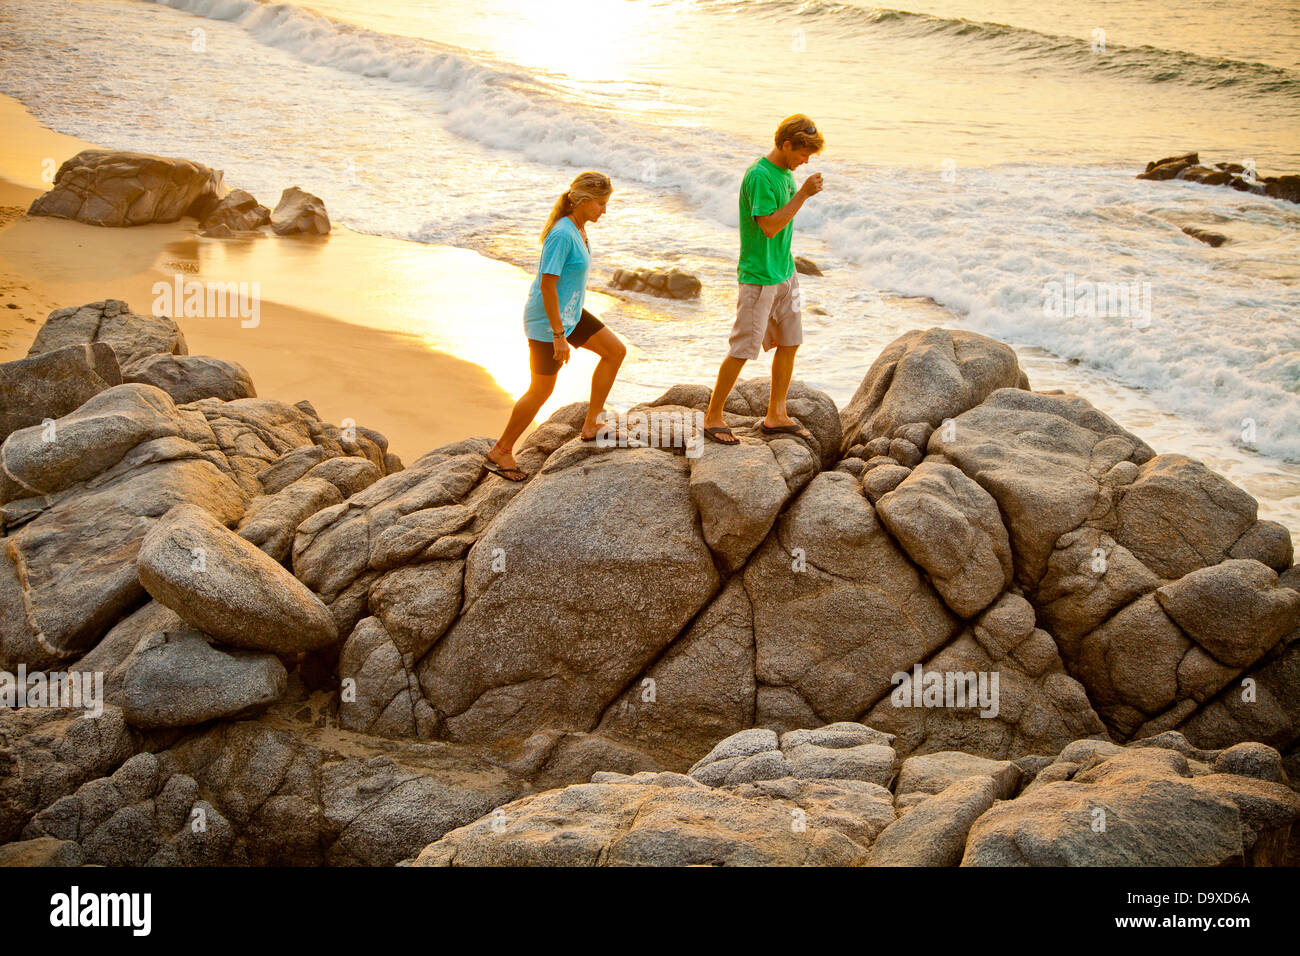 Couple hiking on beach rocks Banque D'Images